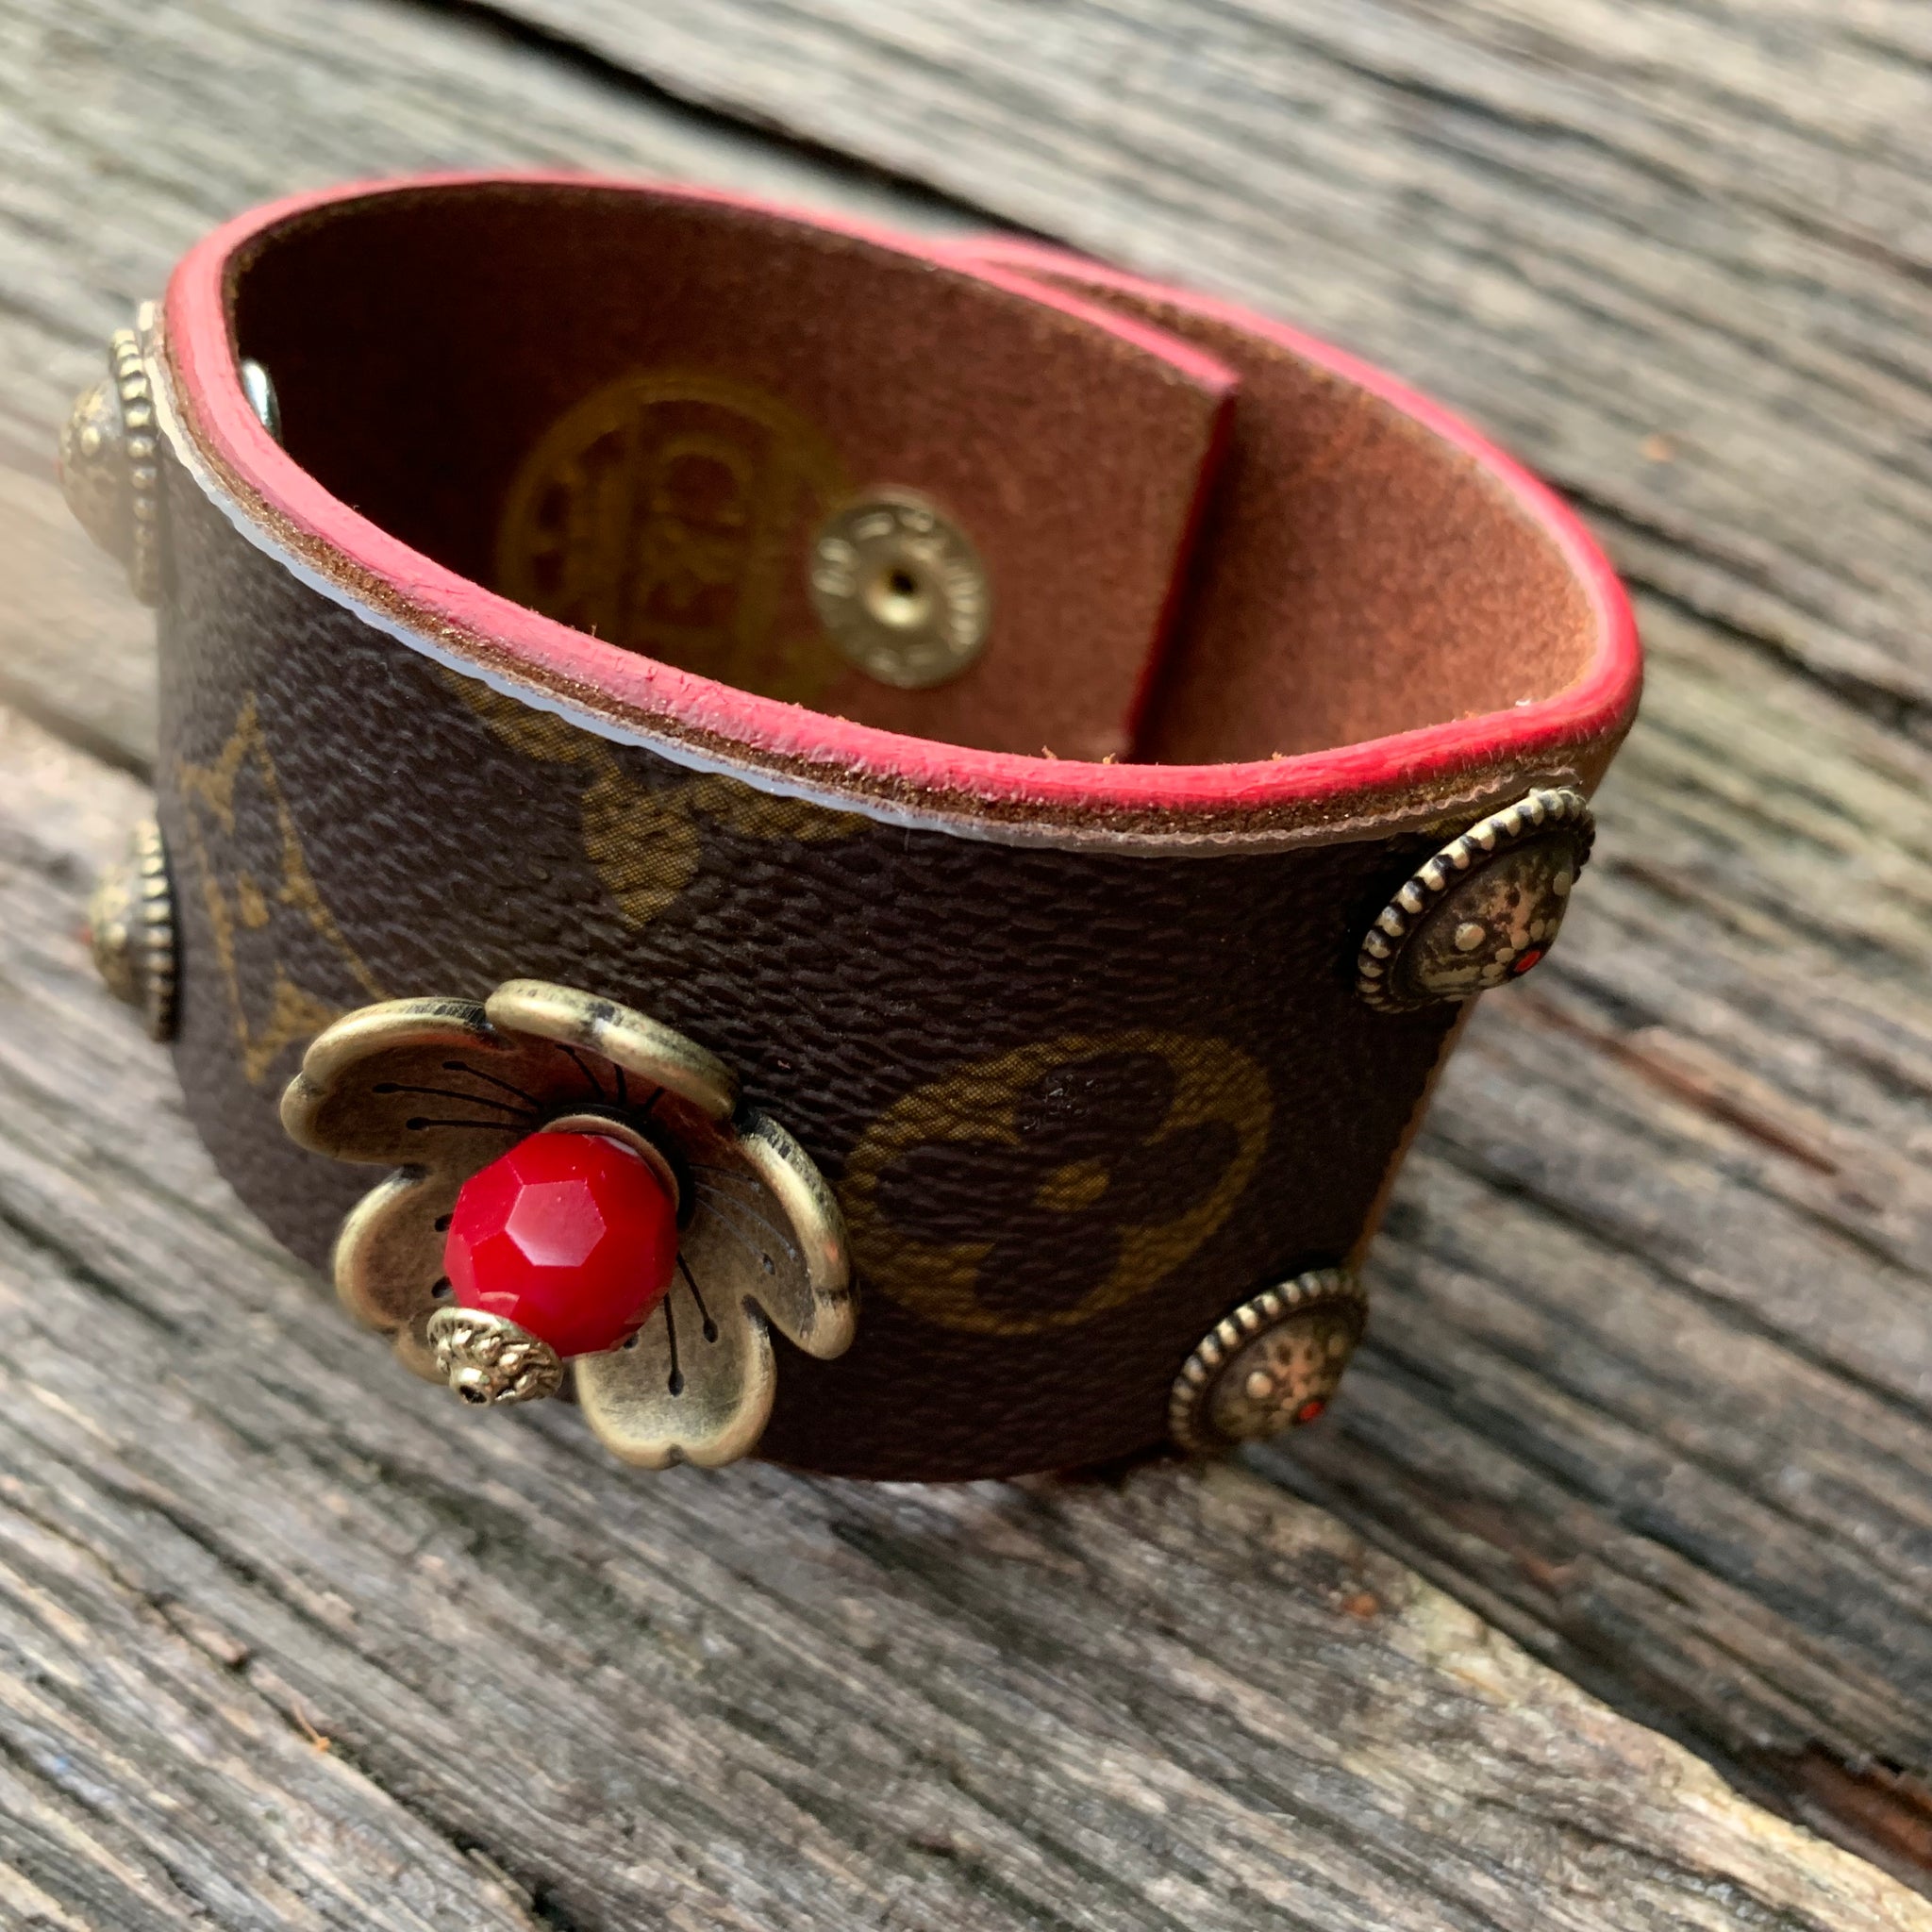 Authentic re-purposed Louis Vuitton cuff bracelet with floral